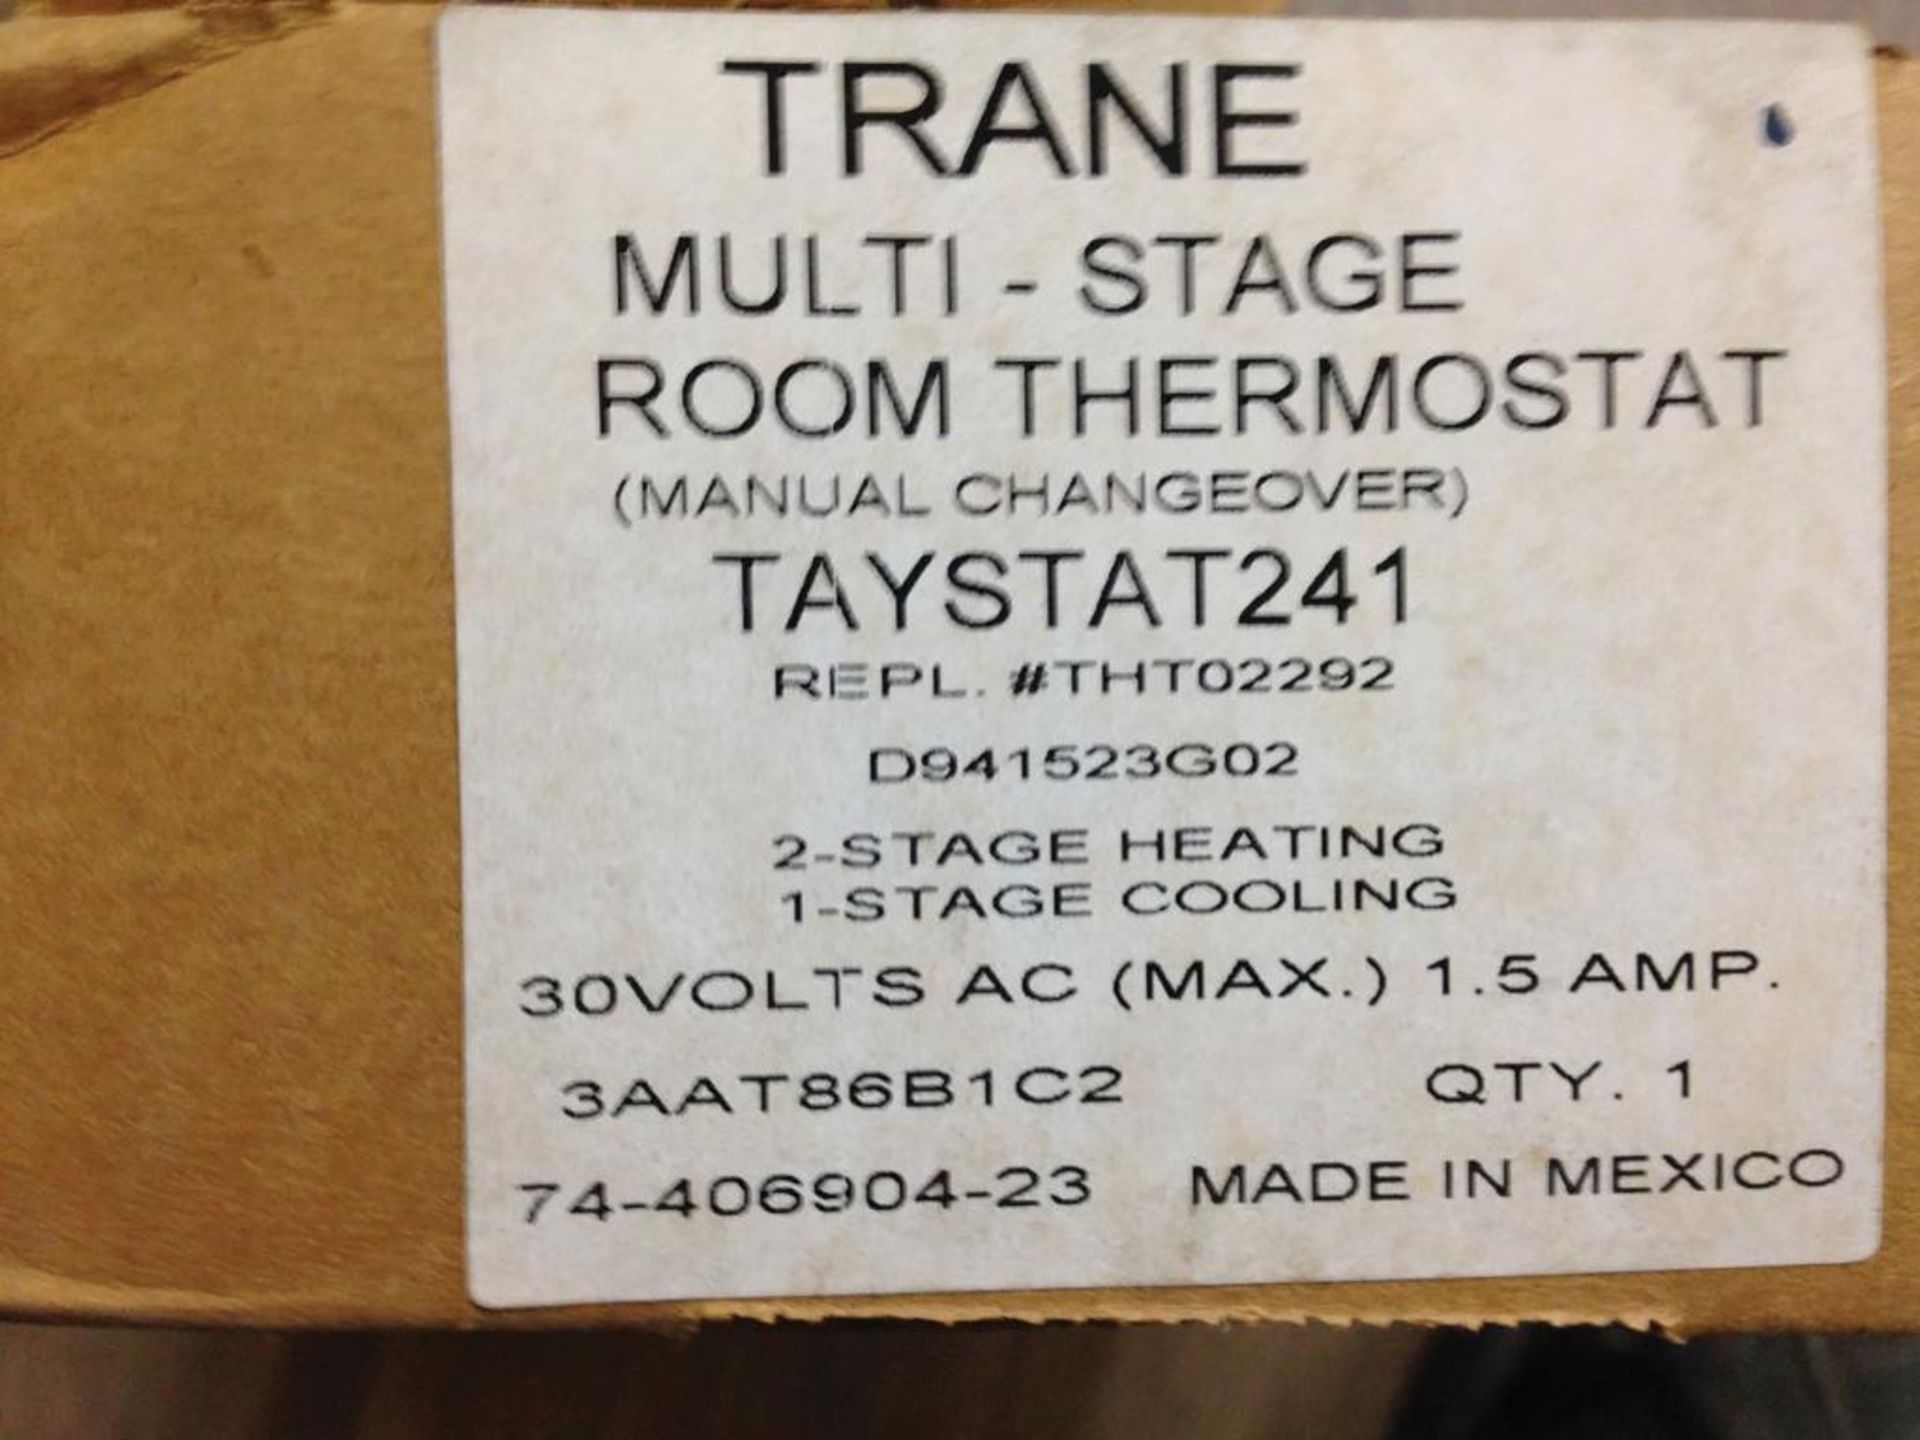 (100) Trane Multi-Stage Room Thermostats (Manual Changeover), Volts: 30 Vac, Amps: 1.5, Heating: 2-S - Image 5 of 6